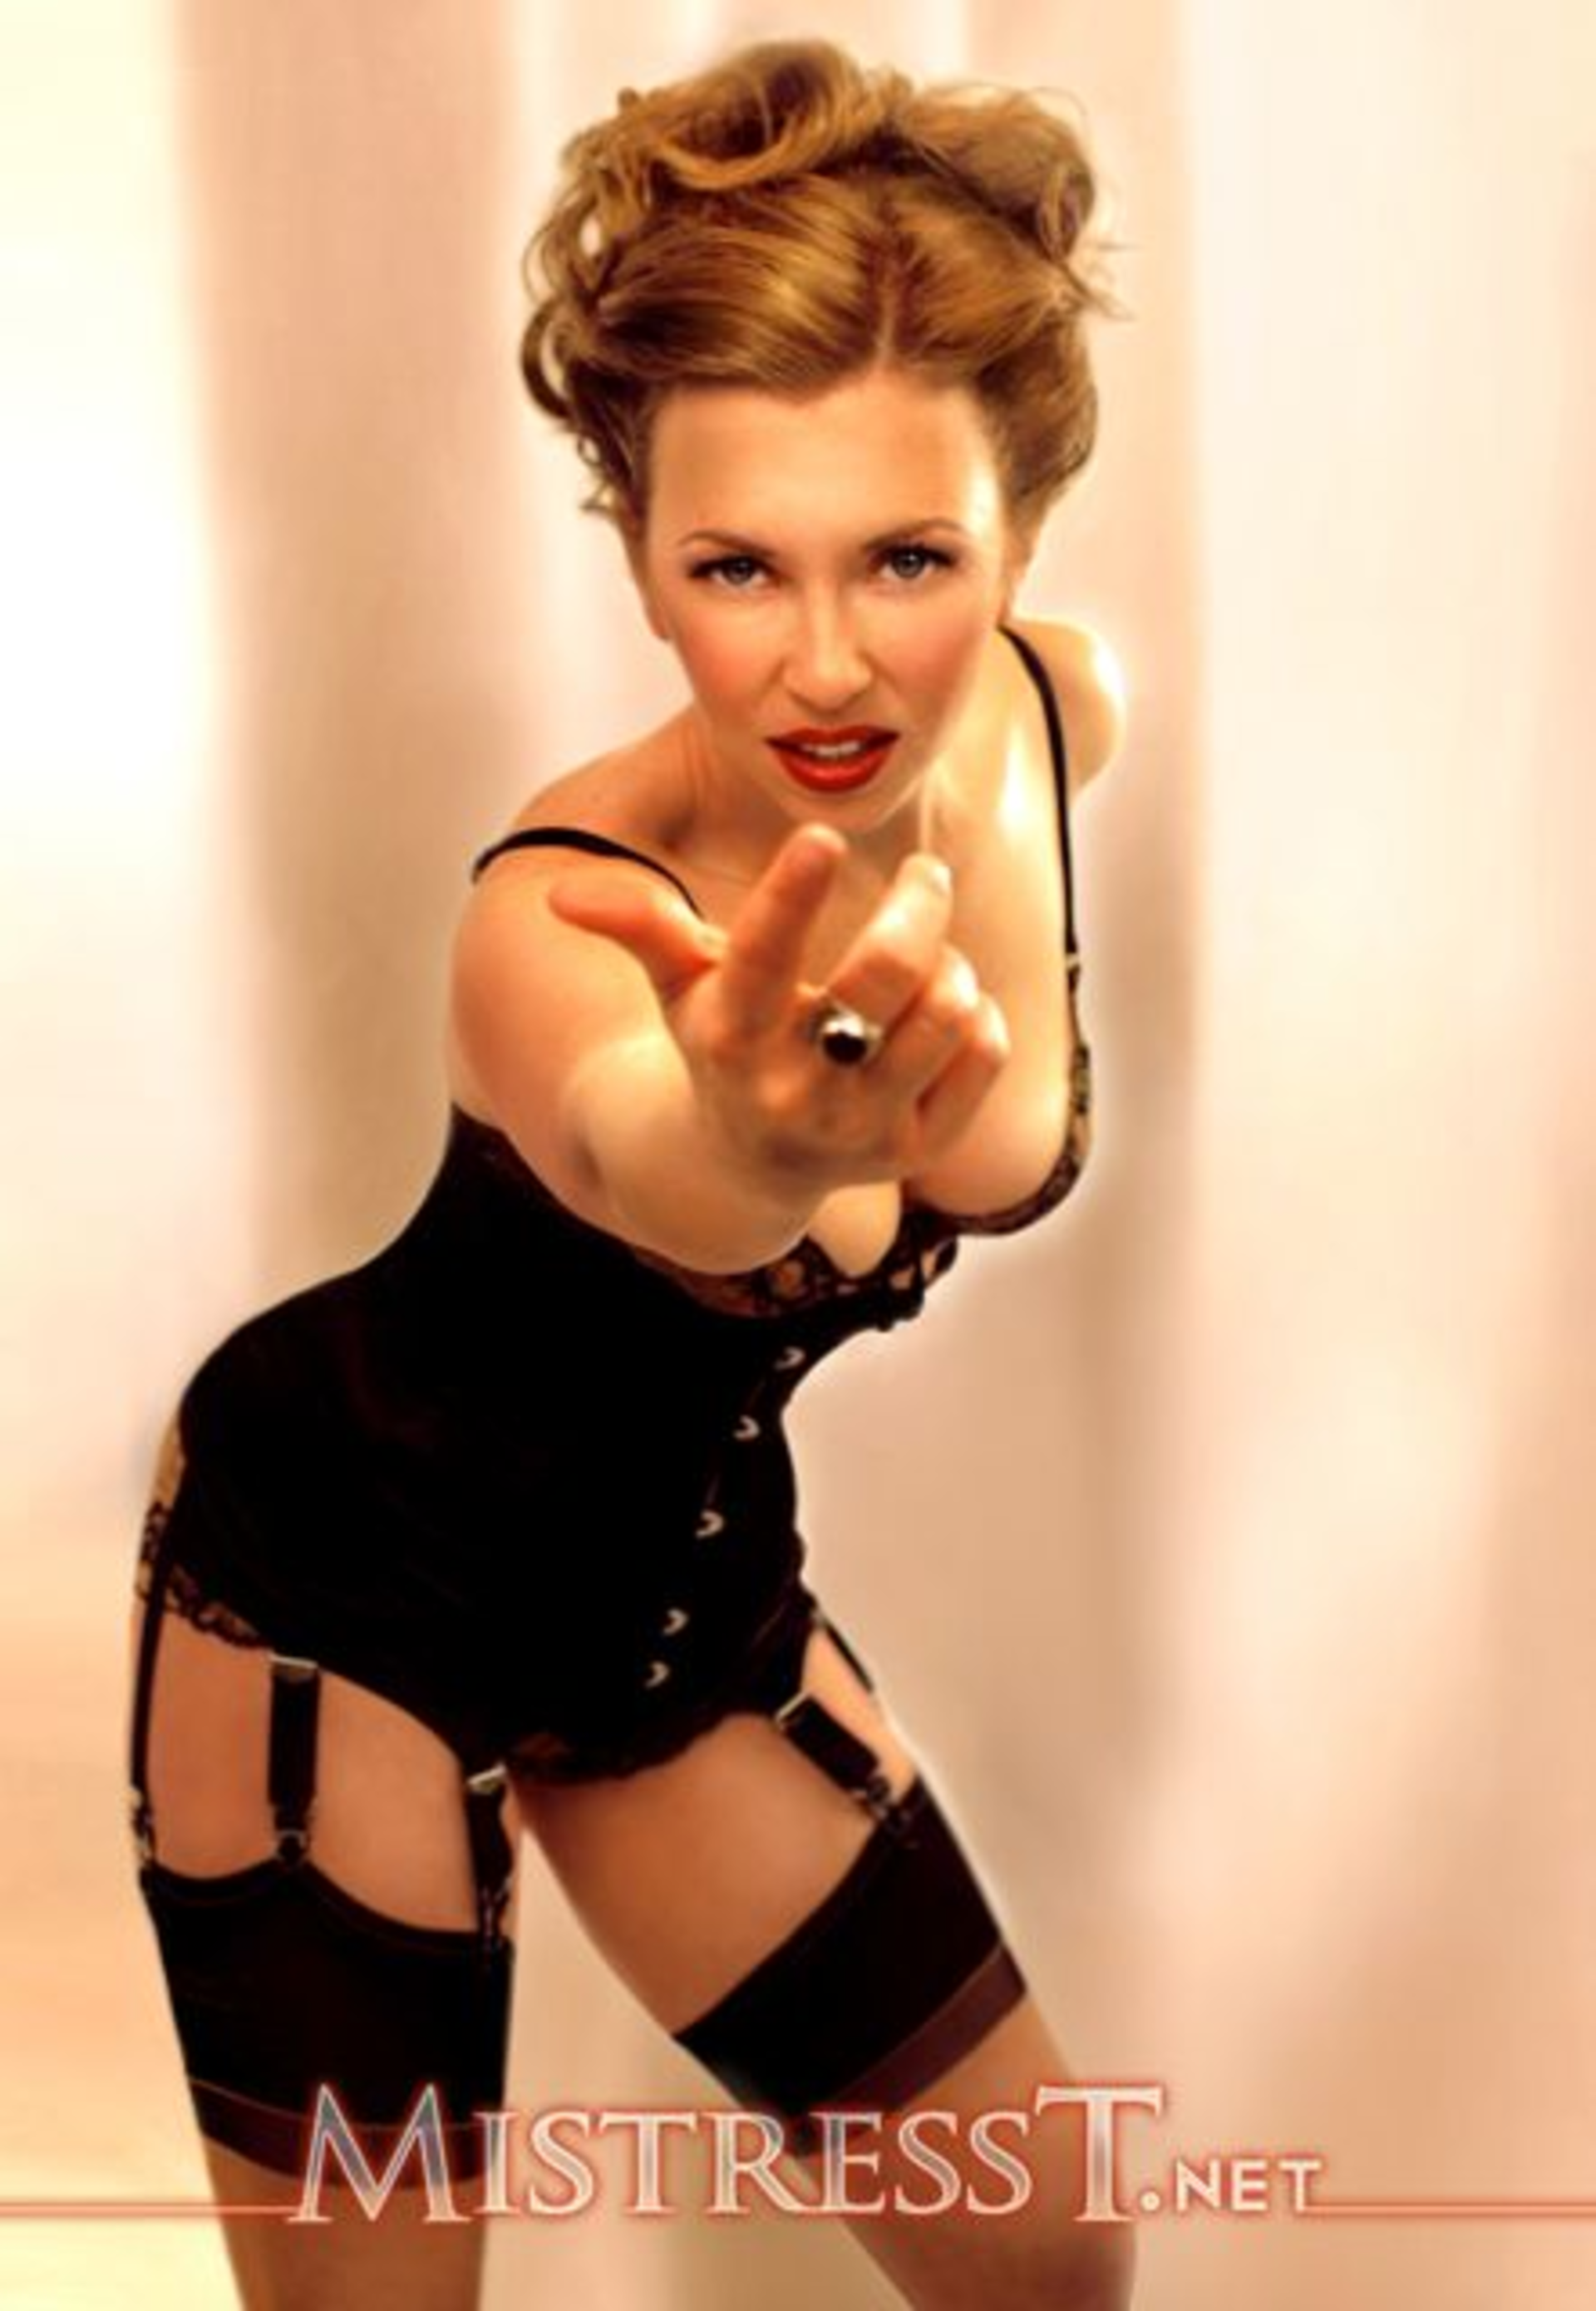 Pro FemDom, Mistress T, on the art of control Tampa Bay News Tampa Creative Loafing Tampa image